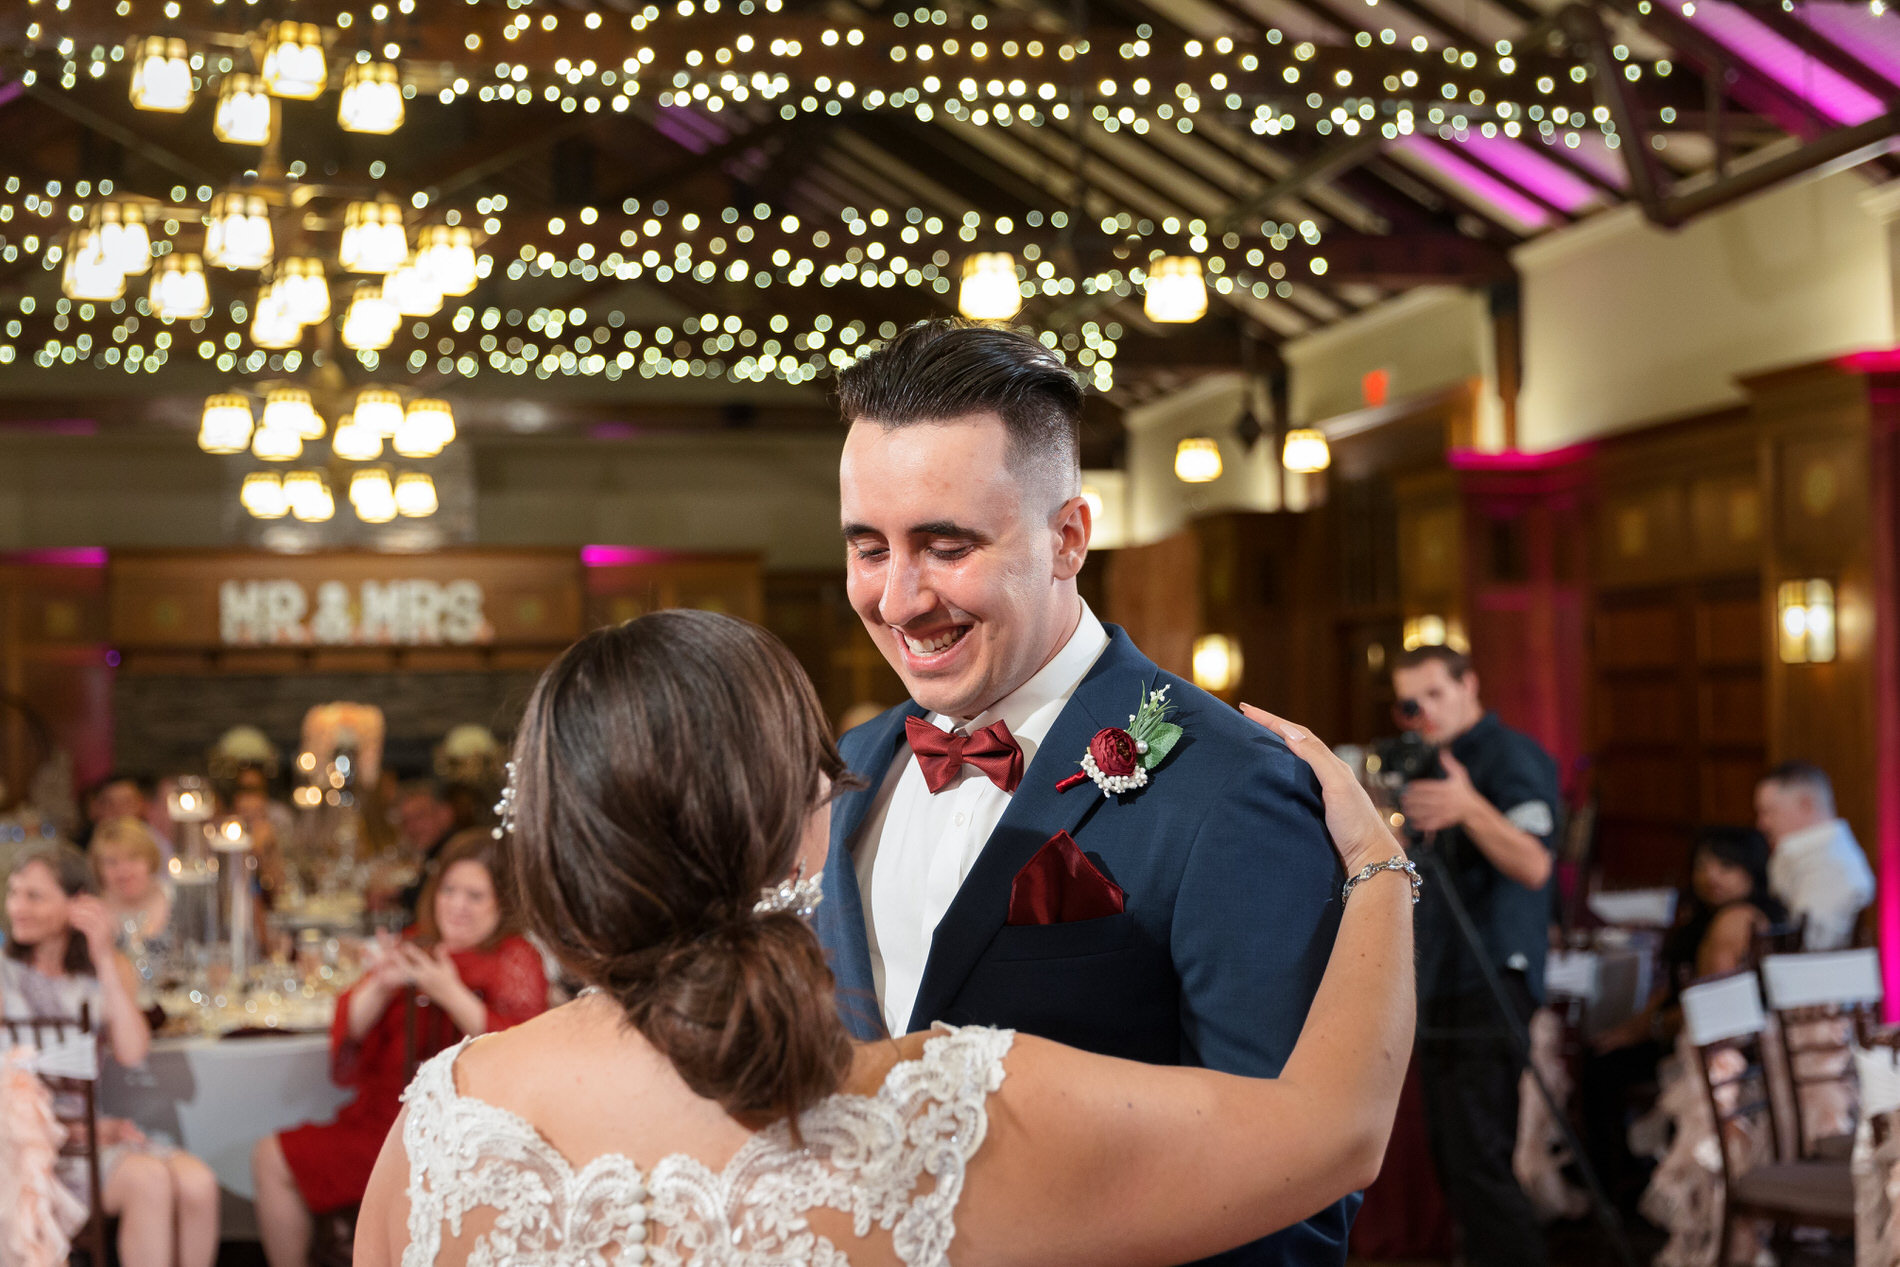 A newlywed couple shares a dance under string lights at a wedding reception in Western Massachusetts, with guests and a "mr. & mrs." sign visible in the background.